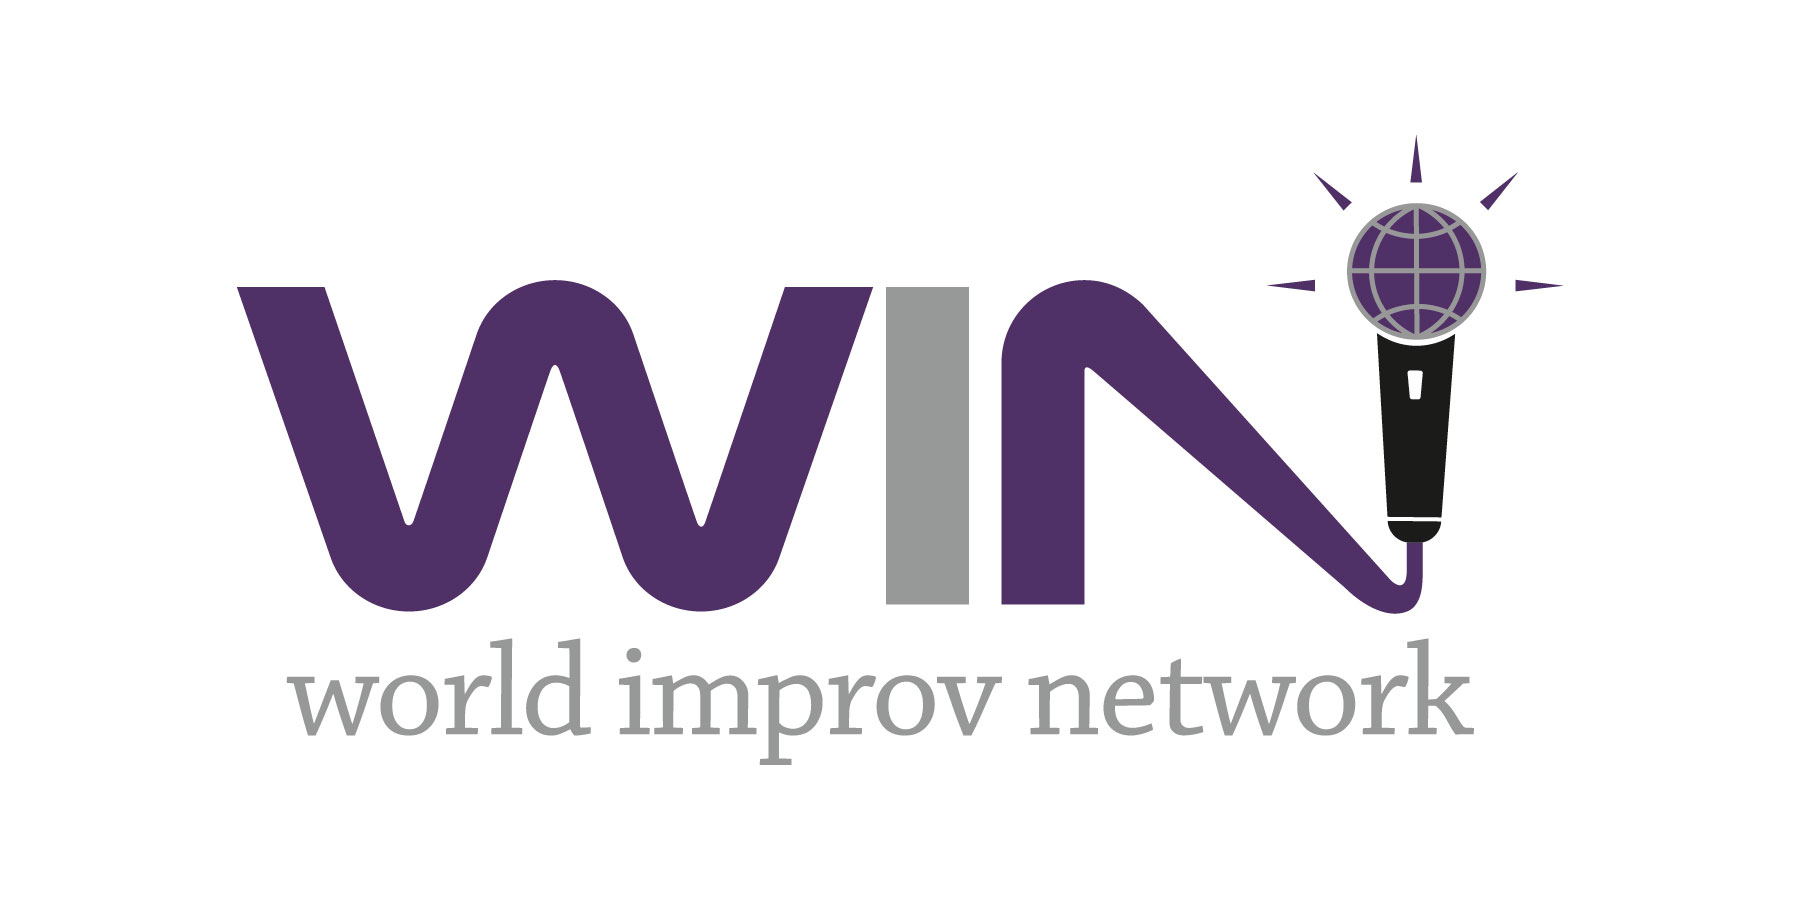 World Improv Network (WIN) - Cast Member In The Live Worldwide Improvised Comedy Radio / TV / Theater Show